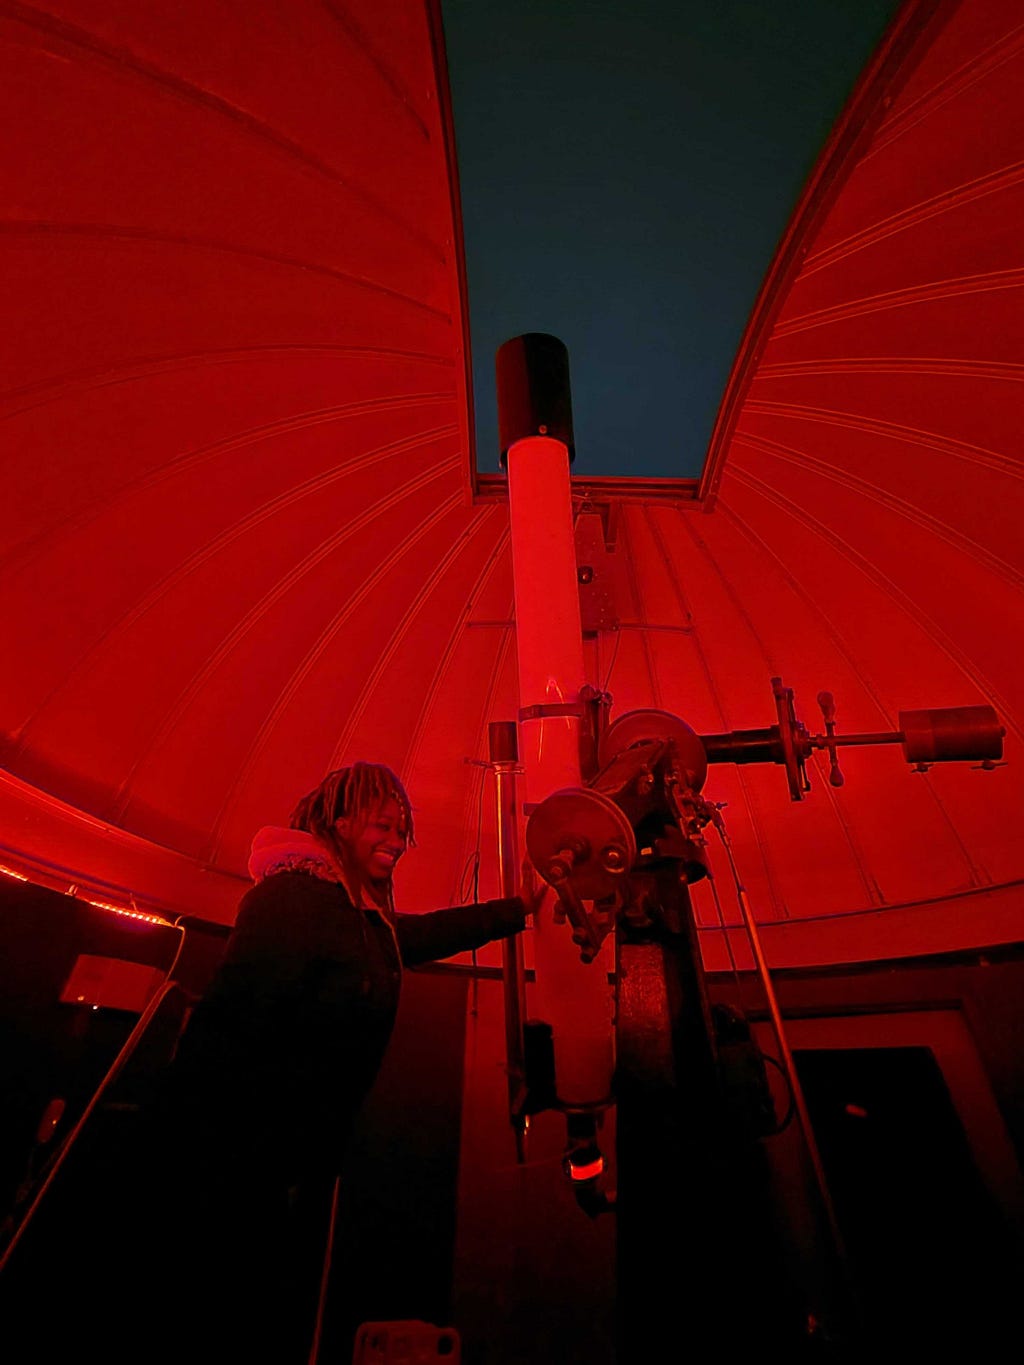 Black girl smiling next to telescope in observatory illuminated with red light. The telescope is in a window where the sky is cloudy